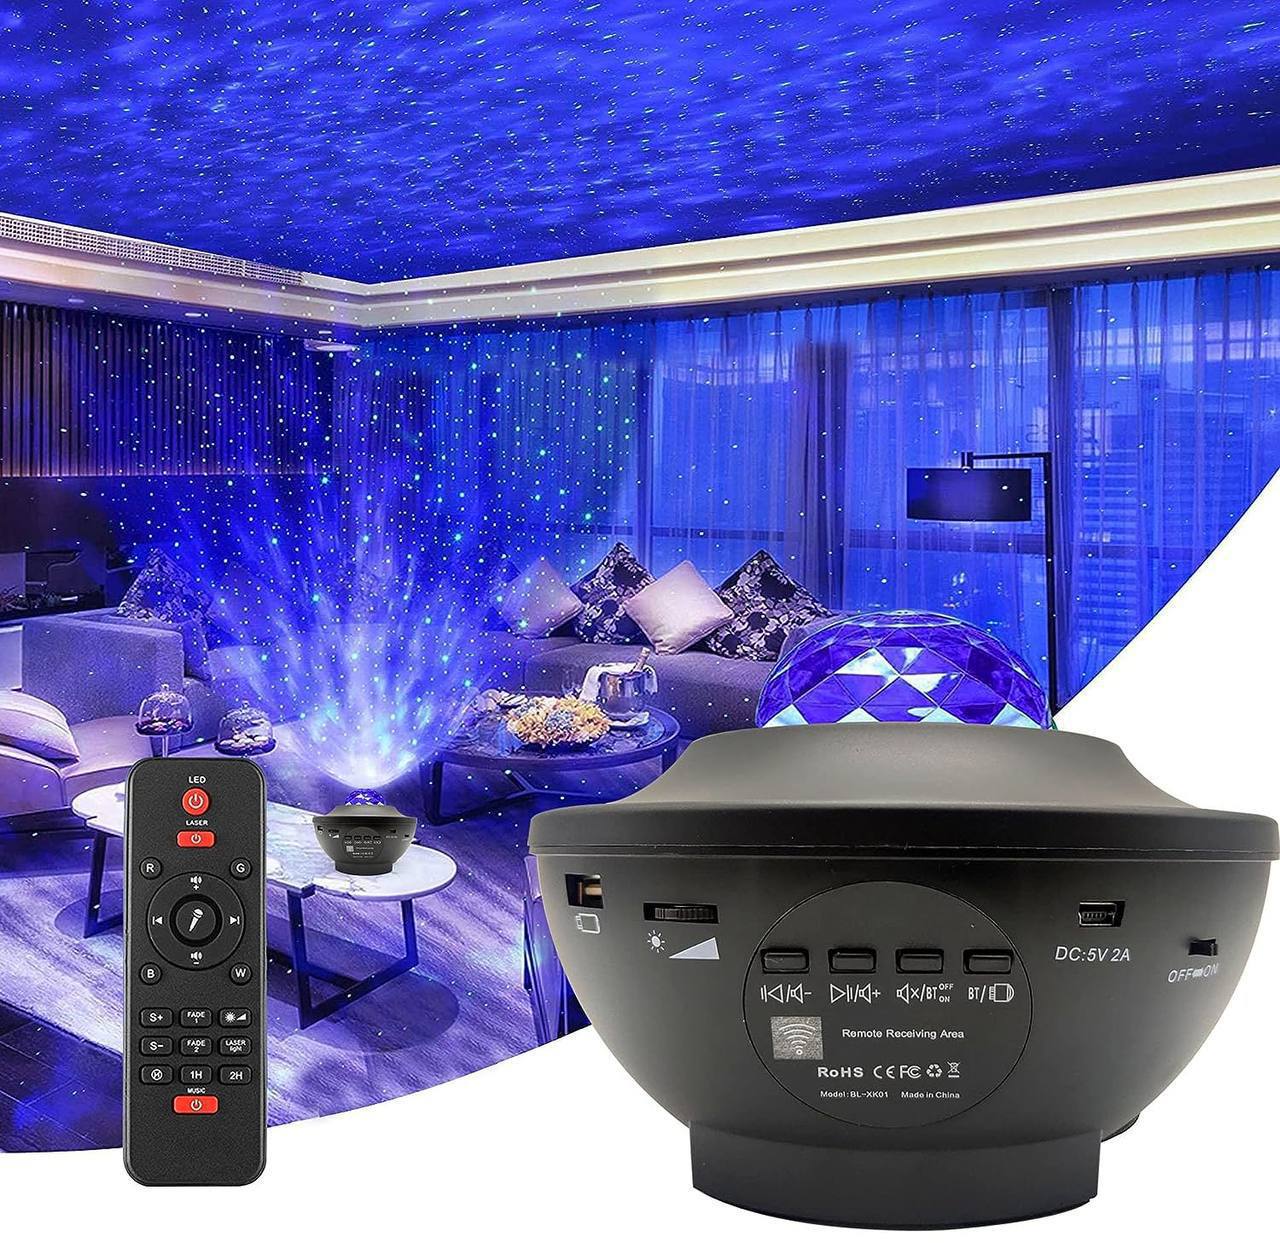 3 in 1 Galaxy Projector, Norhthern Light Projector Star Projector, Ocean Wave ceiling Projector For baby Bedroom, LED Lights Aurora Projector & Bluetooth Music Speaker with Timer & Remote Control